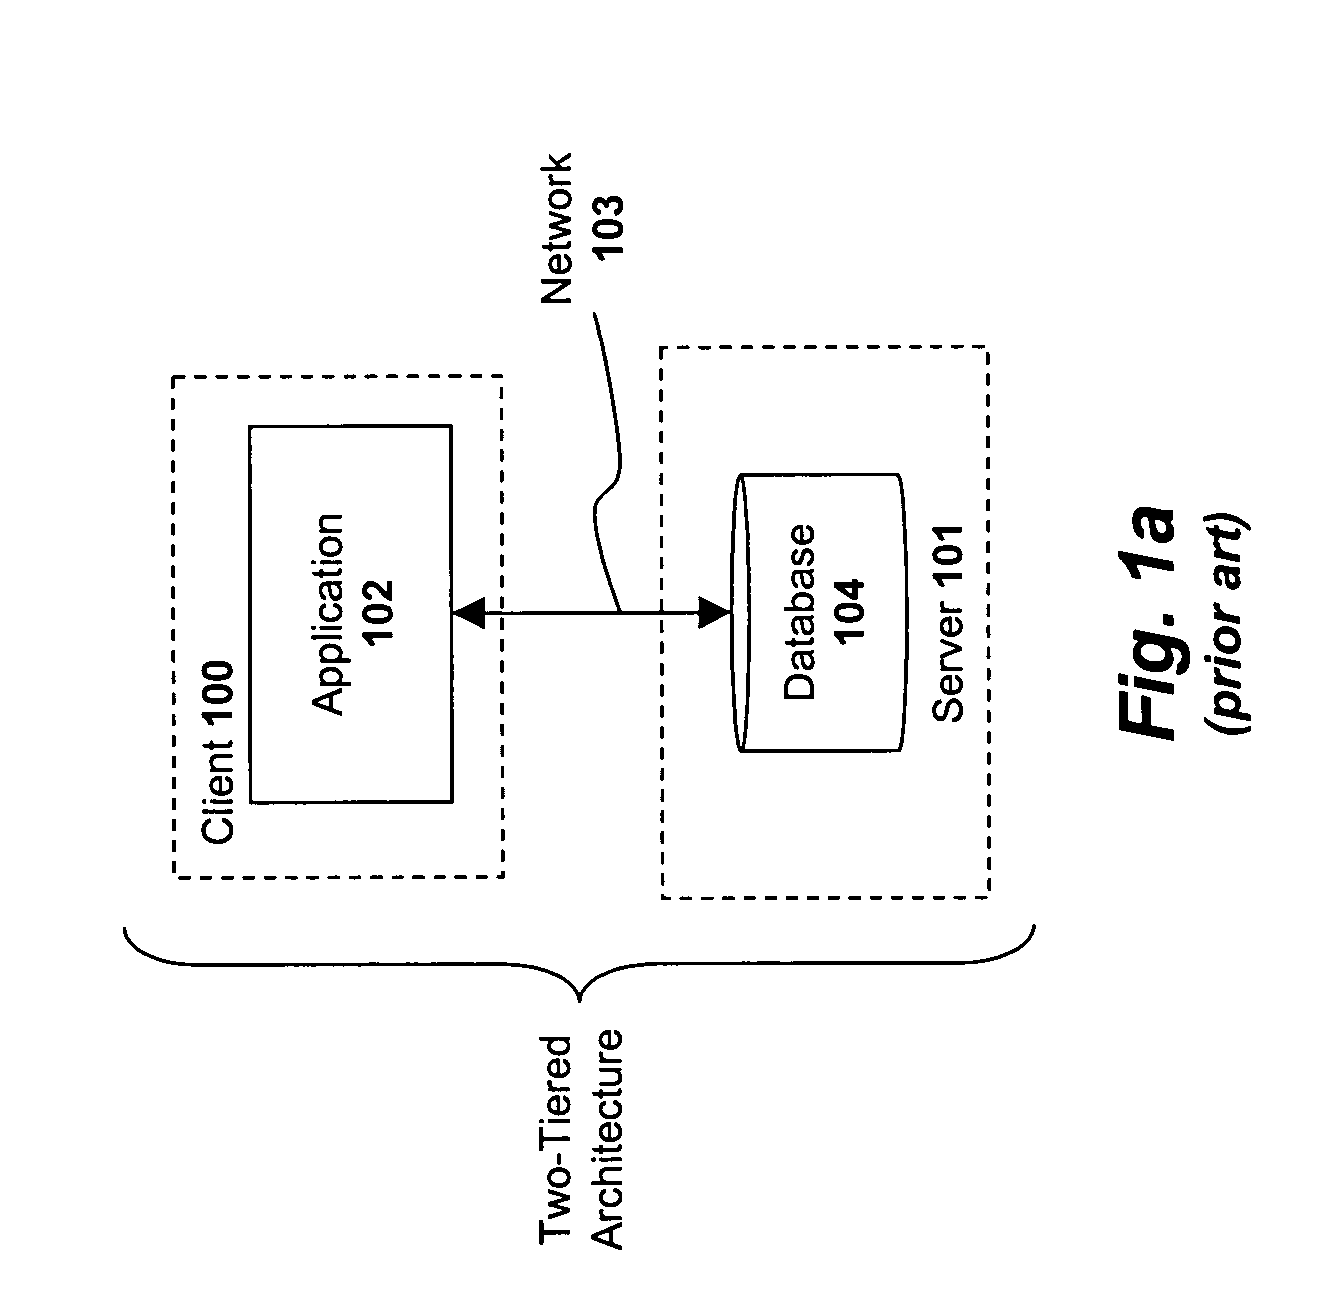 System and method for managing multiple application server clusters using a hierarchical data object and a multi-parameter representation for each configuration property